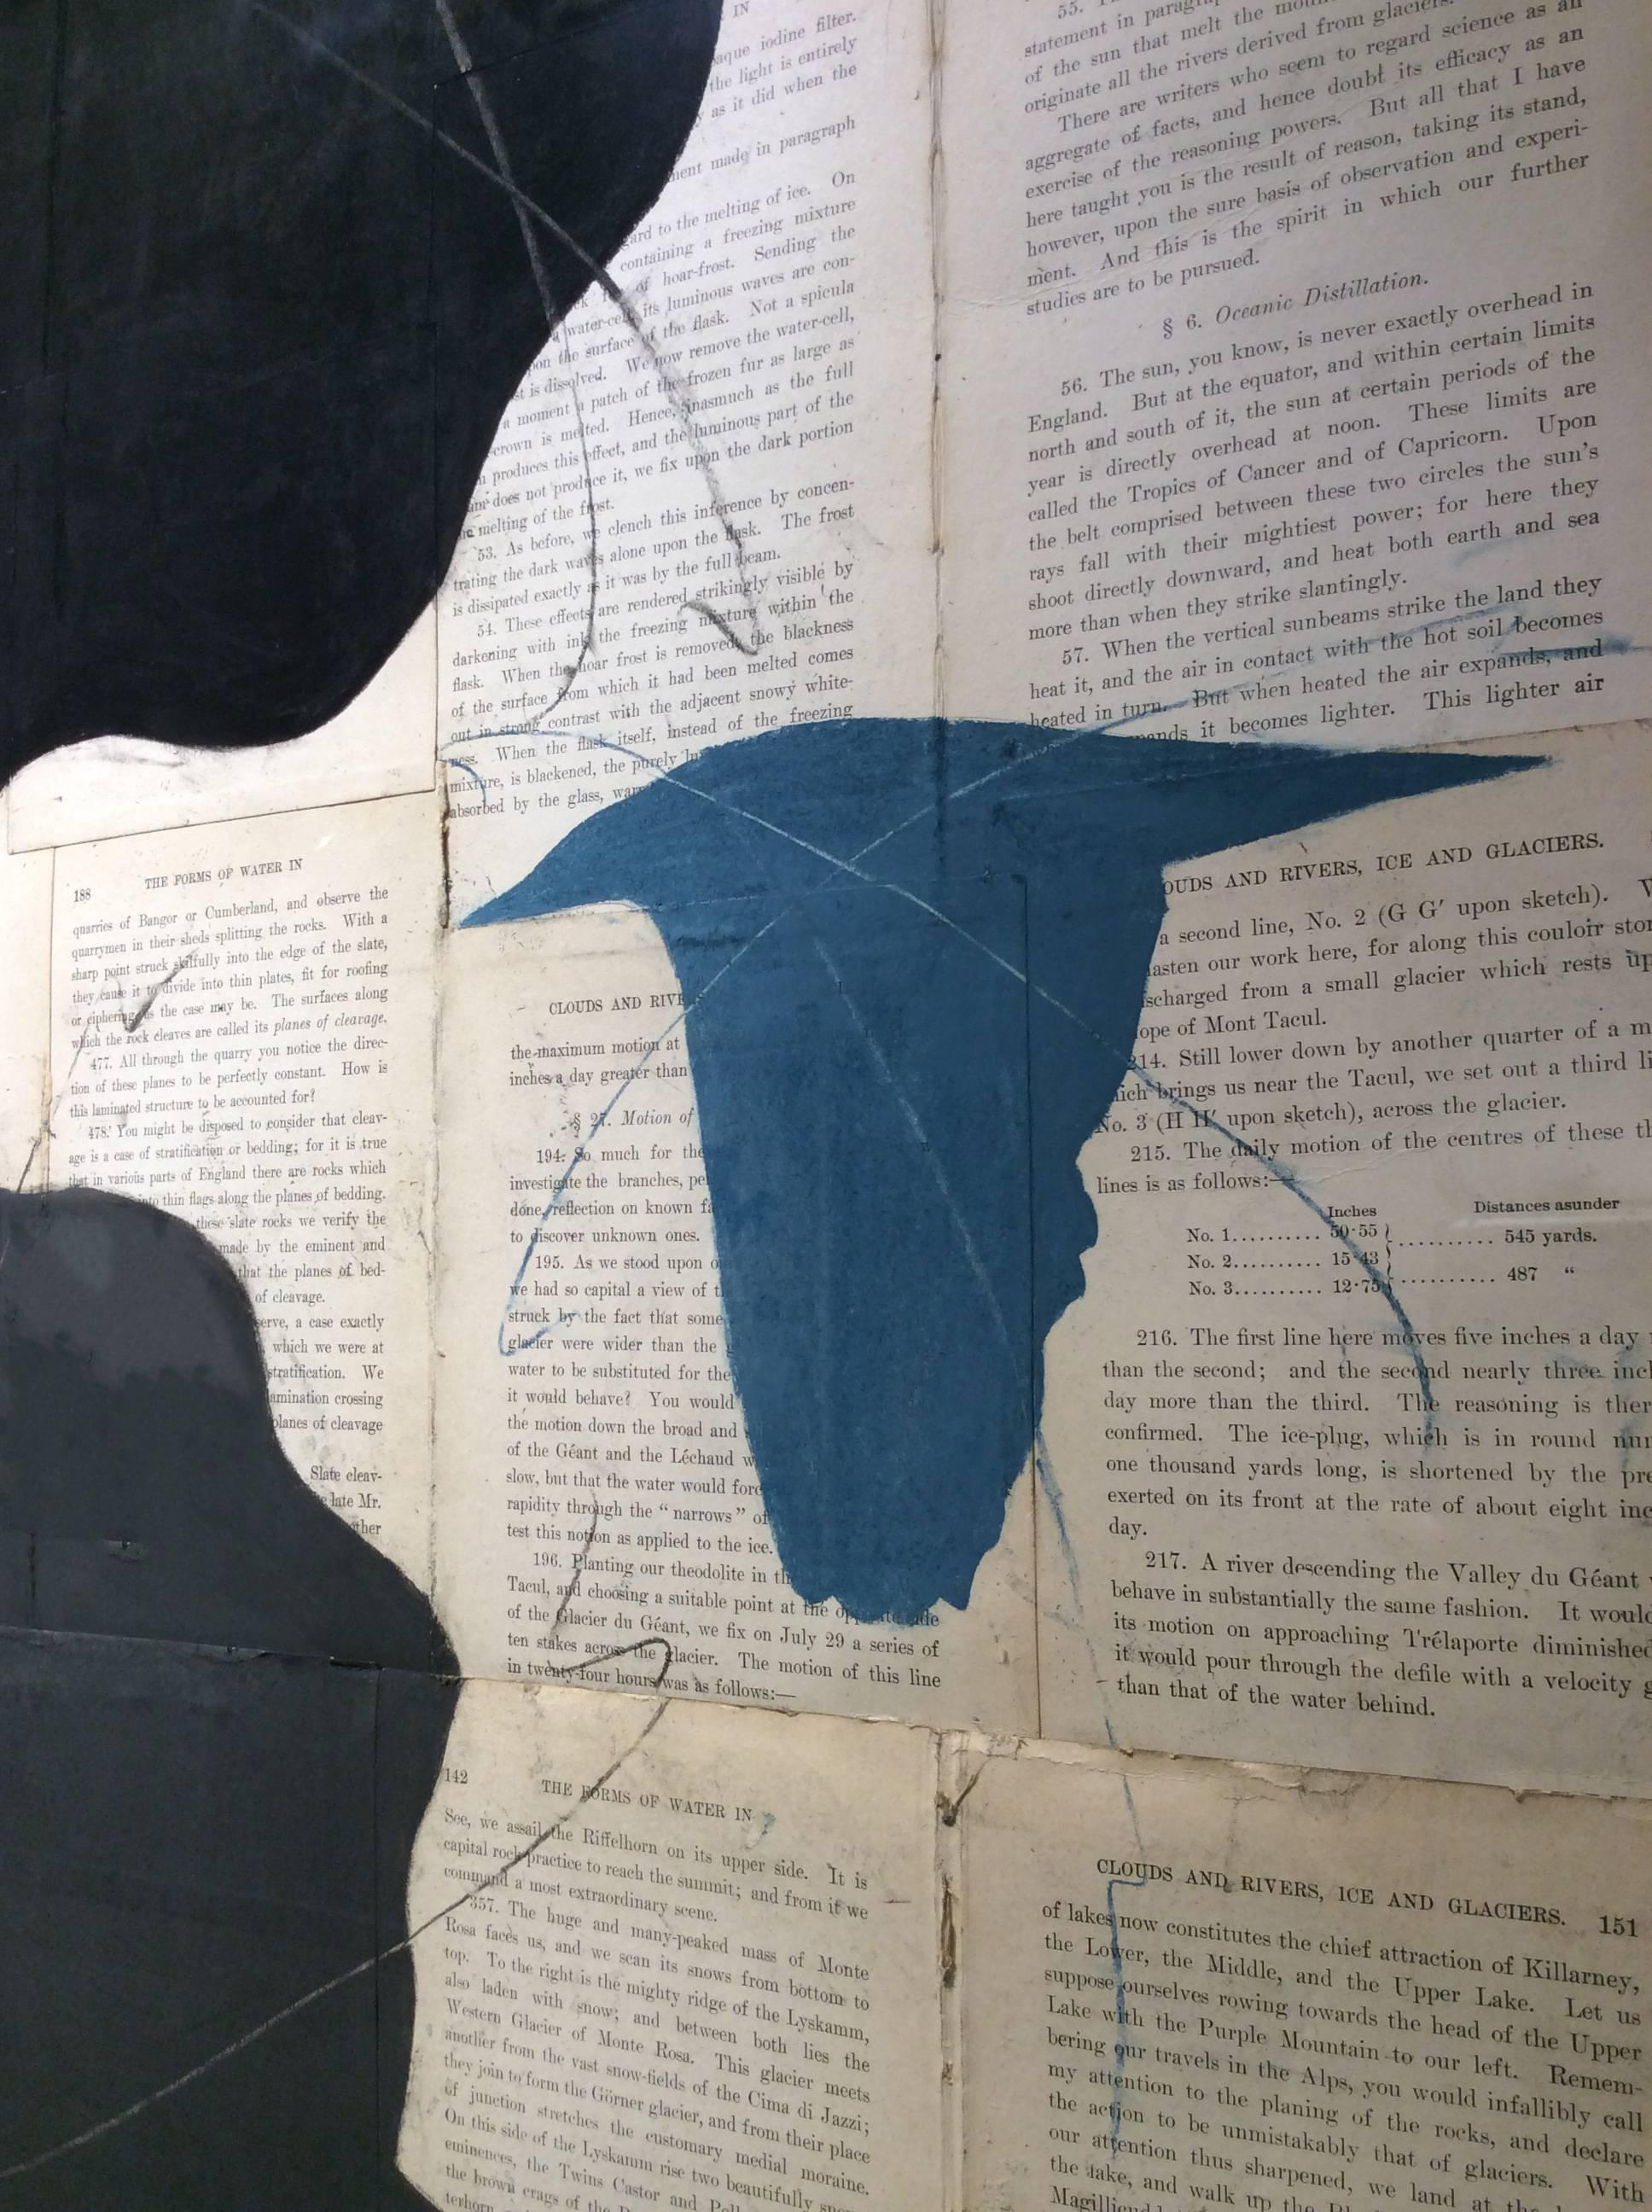 chalk on vintage collaged book pages.
Artwork measures 72 x 31.5 inches,
76.5 x 35.5 inches framed, deckle edge paper is floated in natural wood moulding with glass. 
This work on paper is being offered by Carrie Haddad Gallery, located in Hudson,